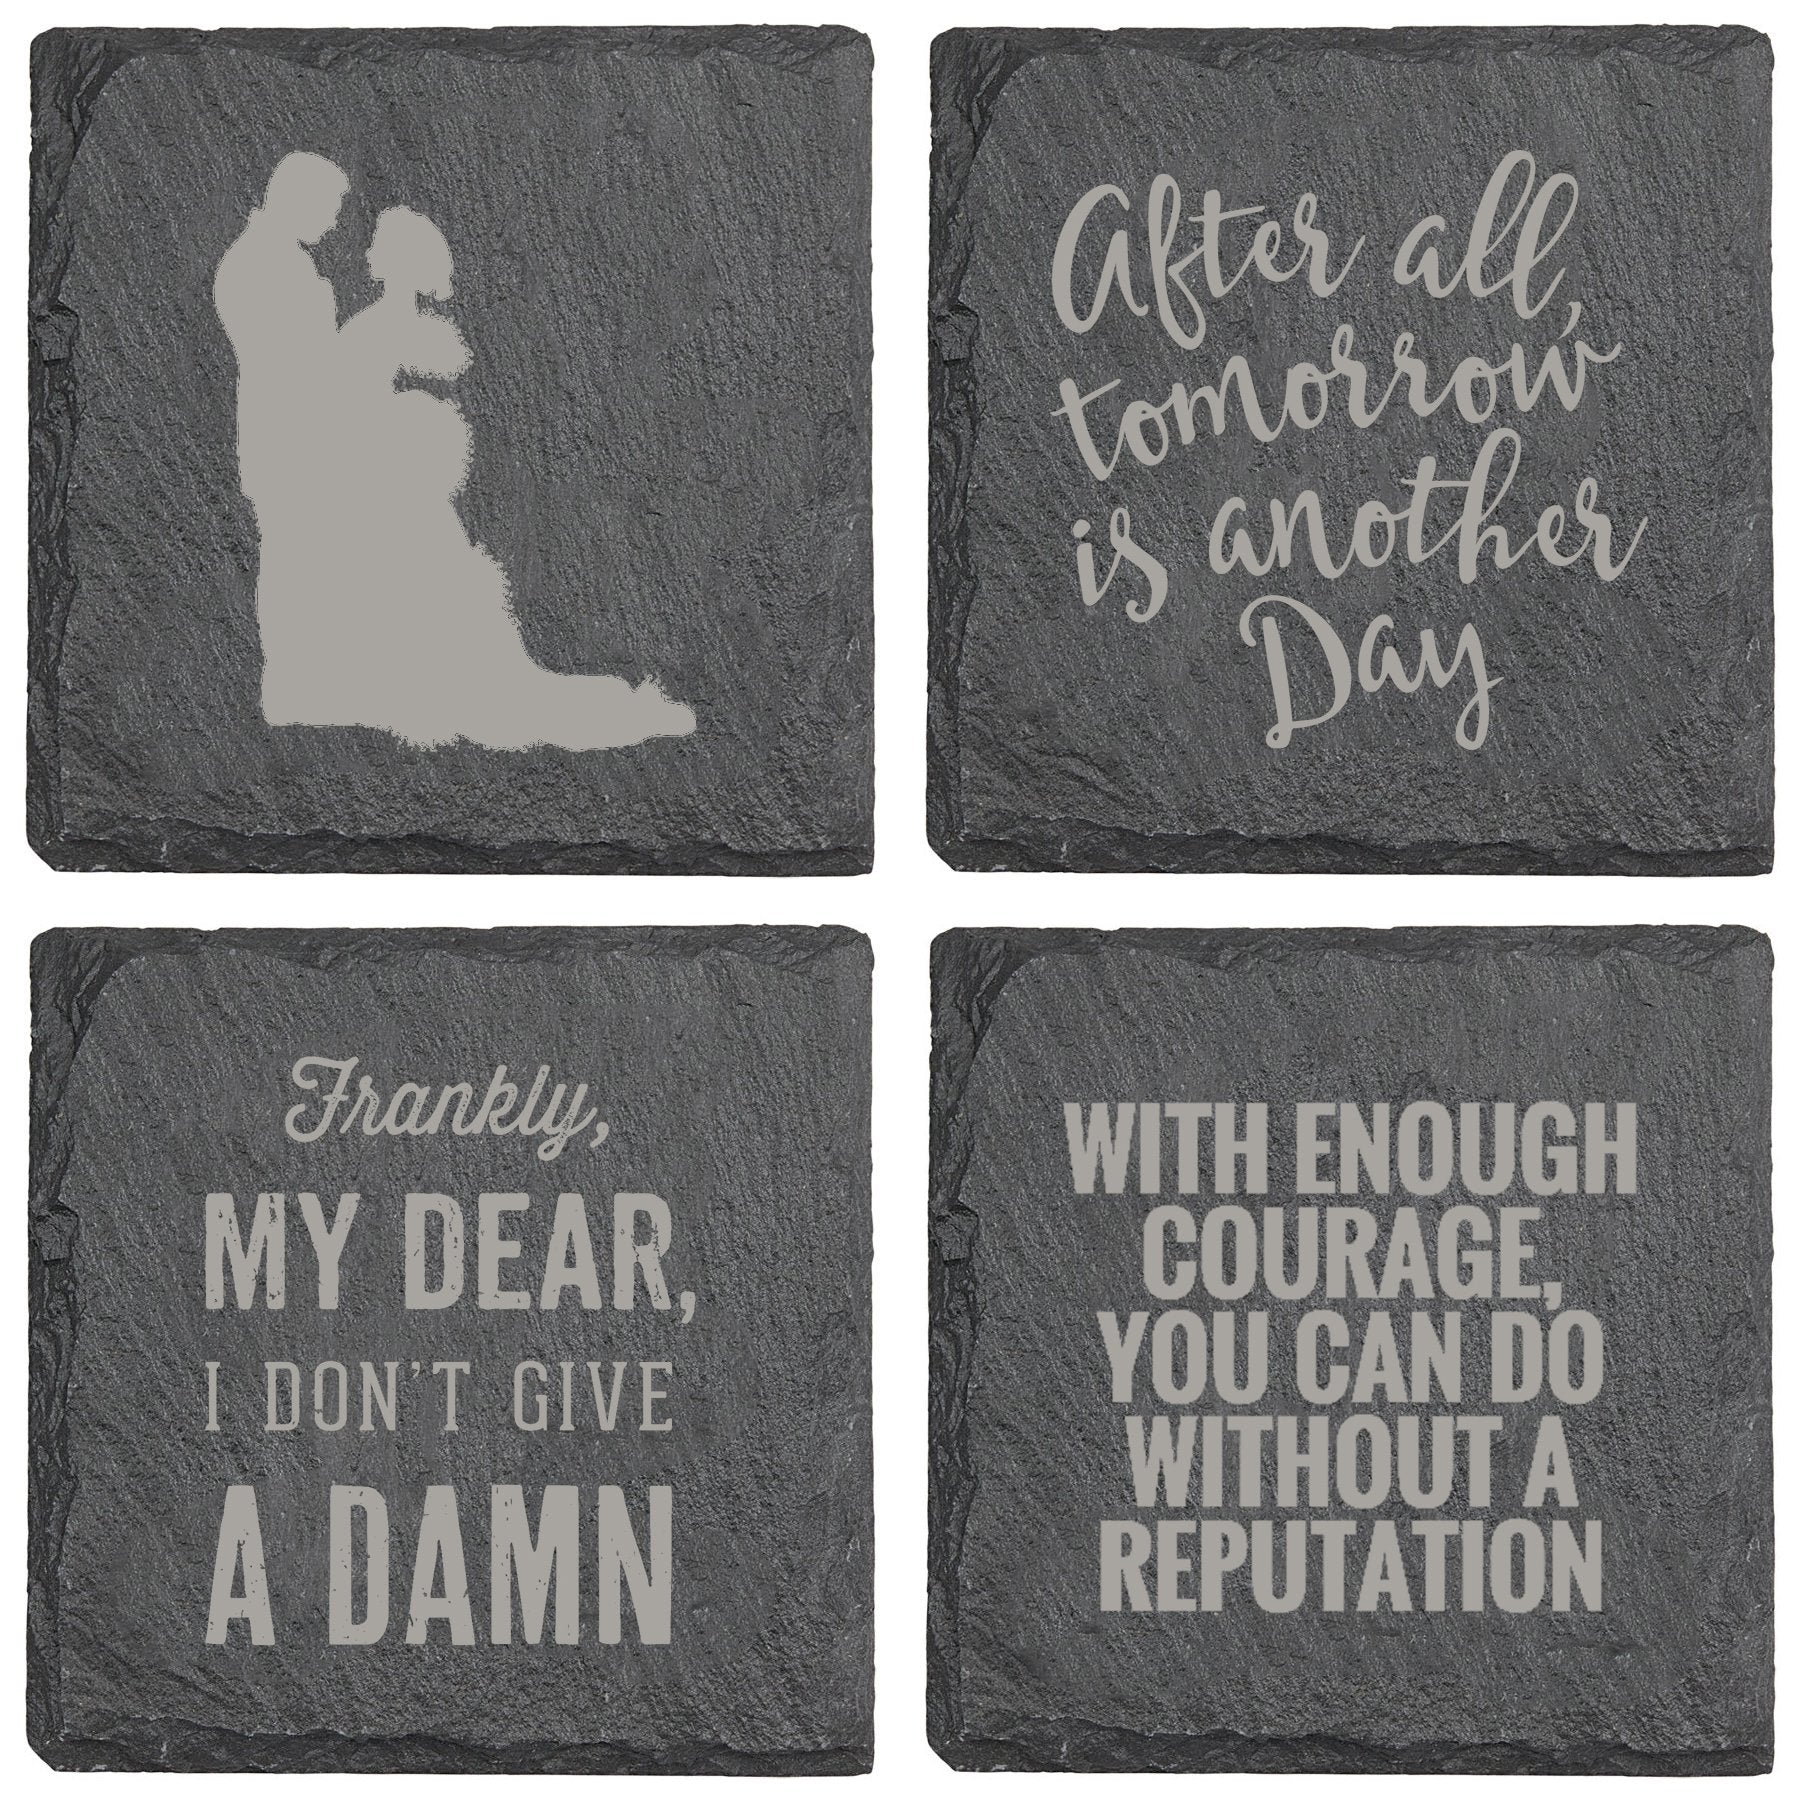 Gone With The Wind After All Tomorrow Is Another Day Slate Coaster